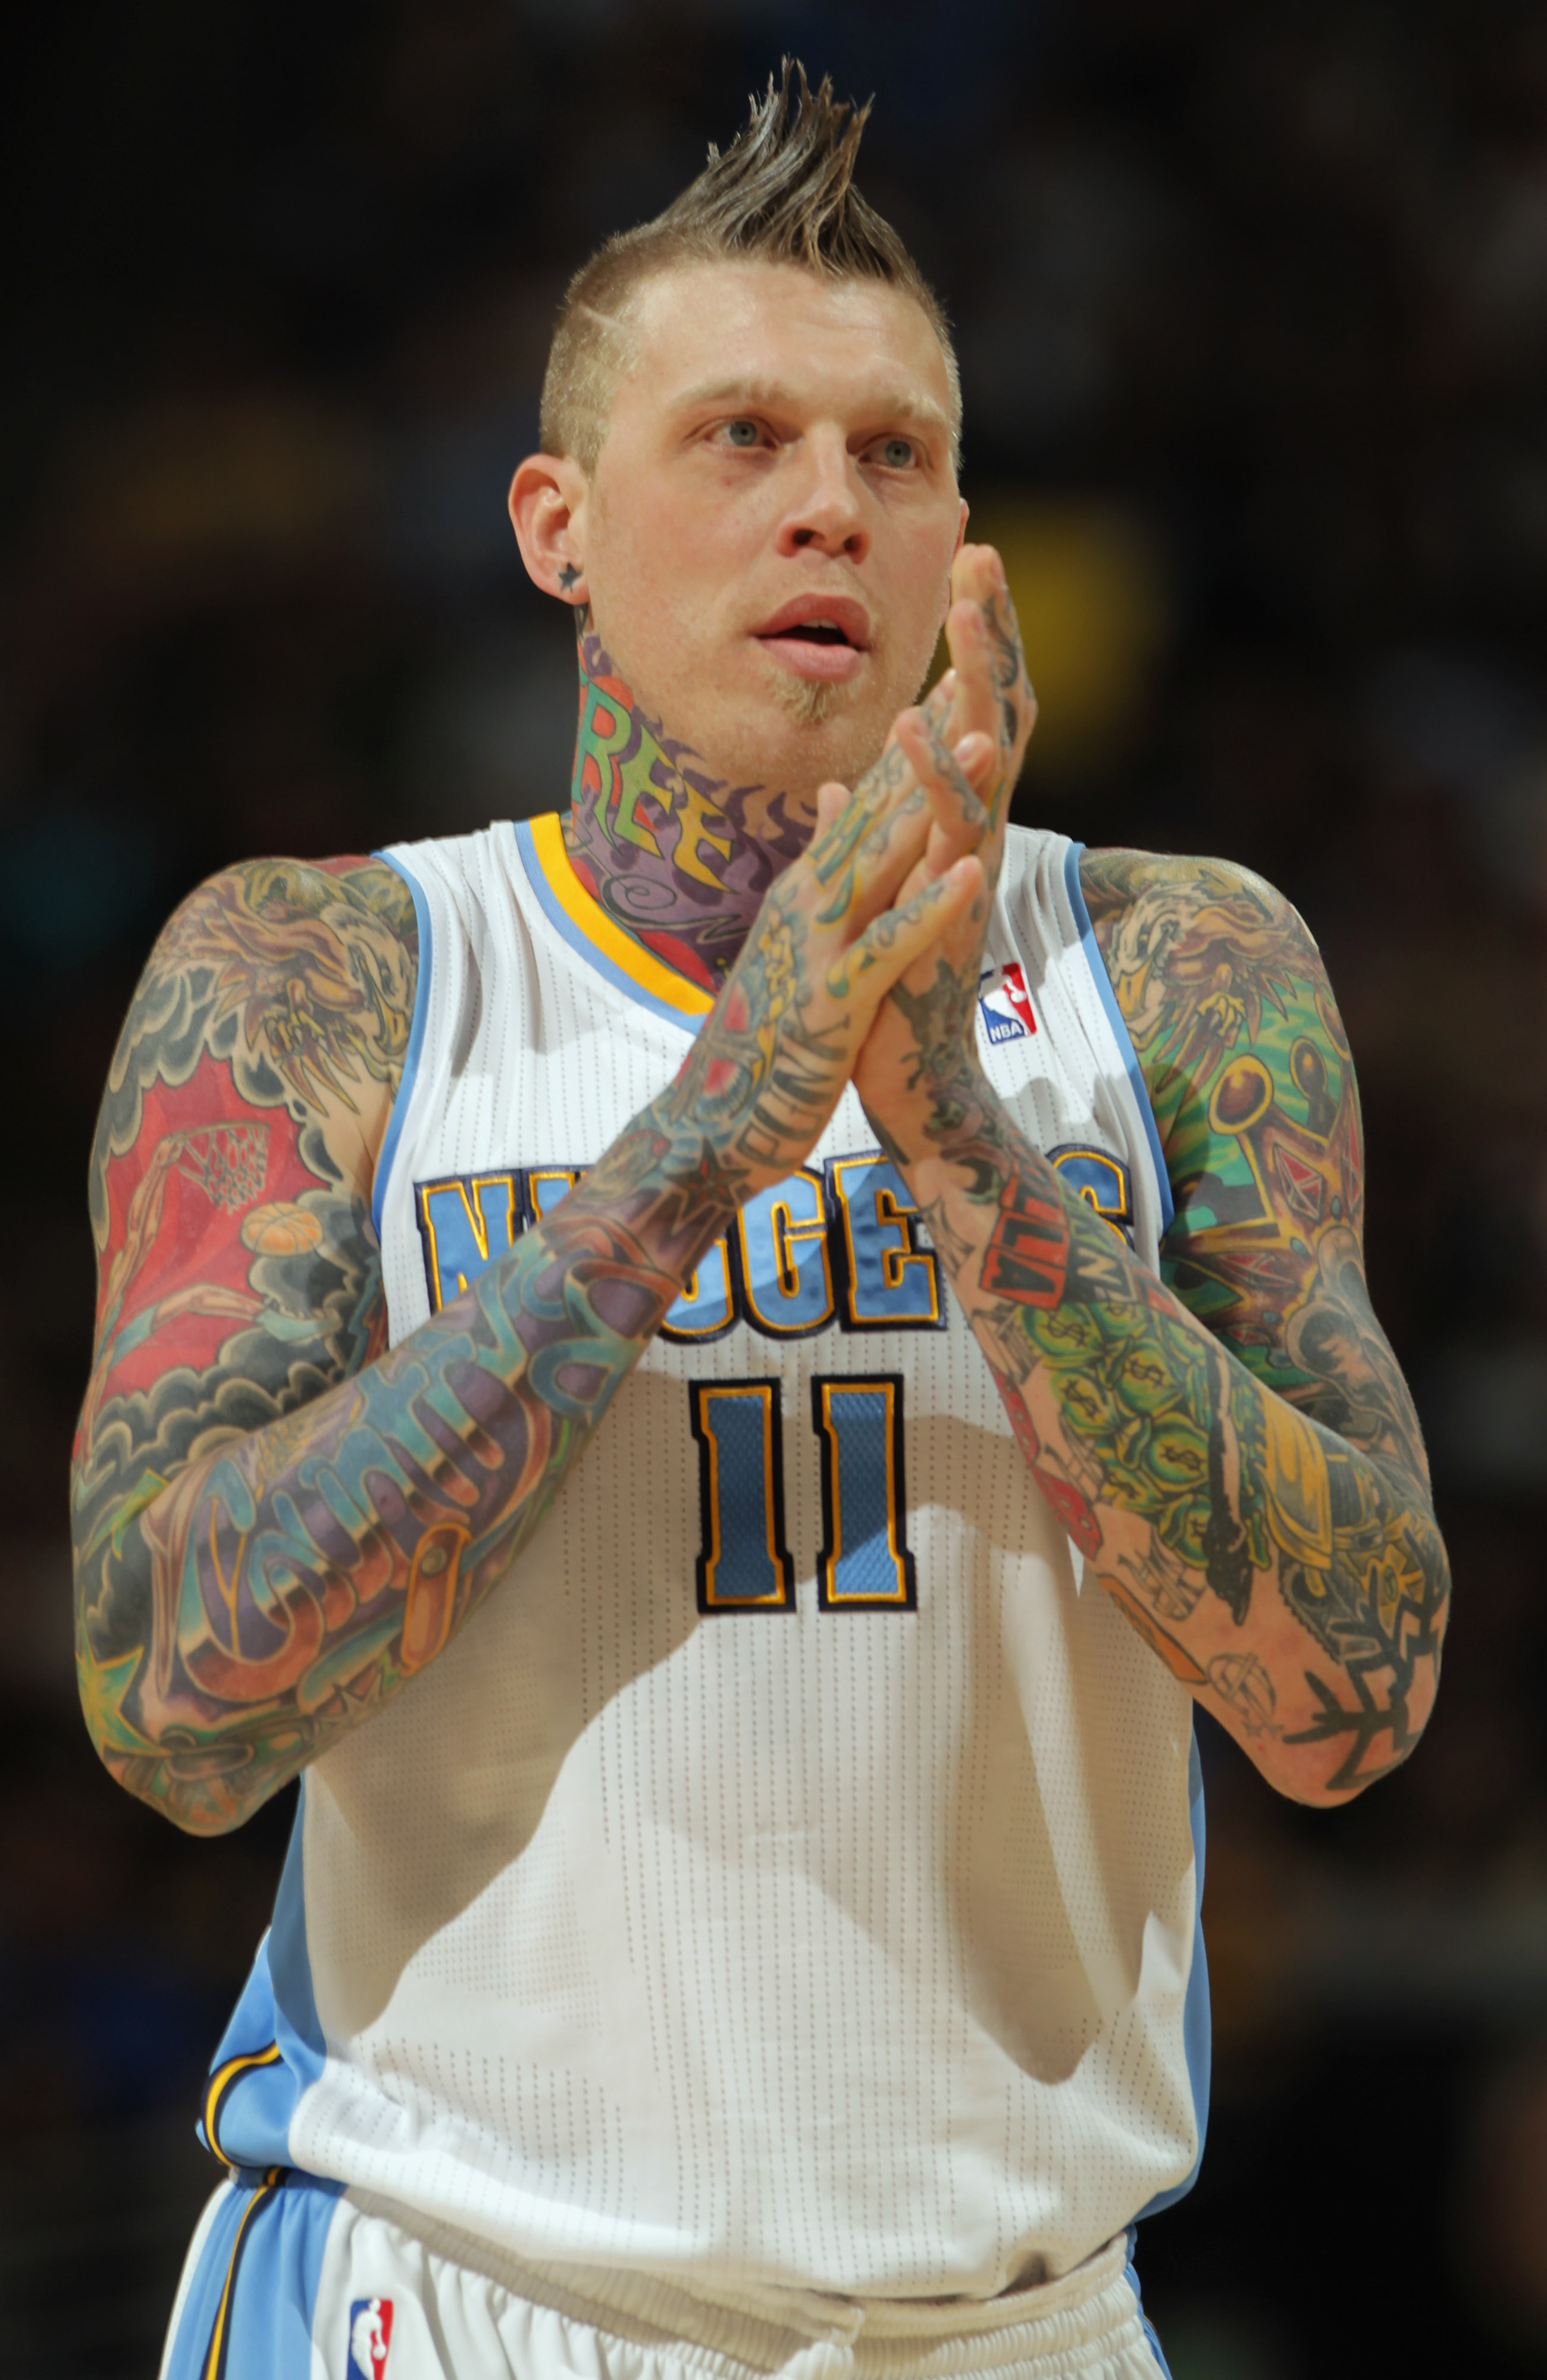 DENVER, CO - MARCH 23:  Chris Andersen #11 of the Denver Nuggets looks on against the San Antonio Spurs at the Pepsi Center on March 23, 2011 in Denver, Colorado. The Nuggets defeated the Spurs 115-112. NOTE TO USER: User expressly acknowledges and agrees